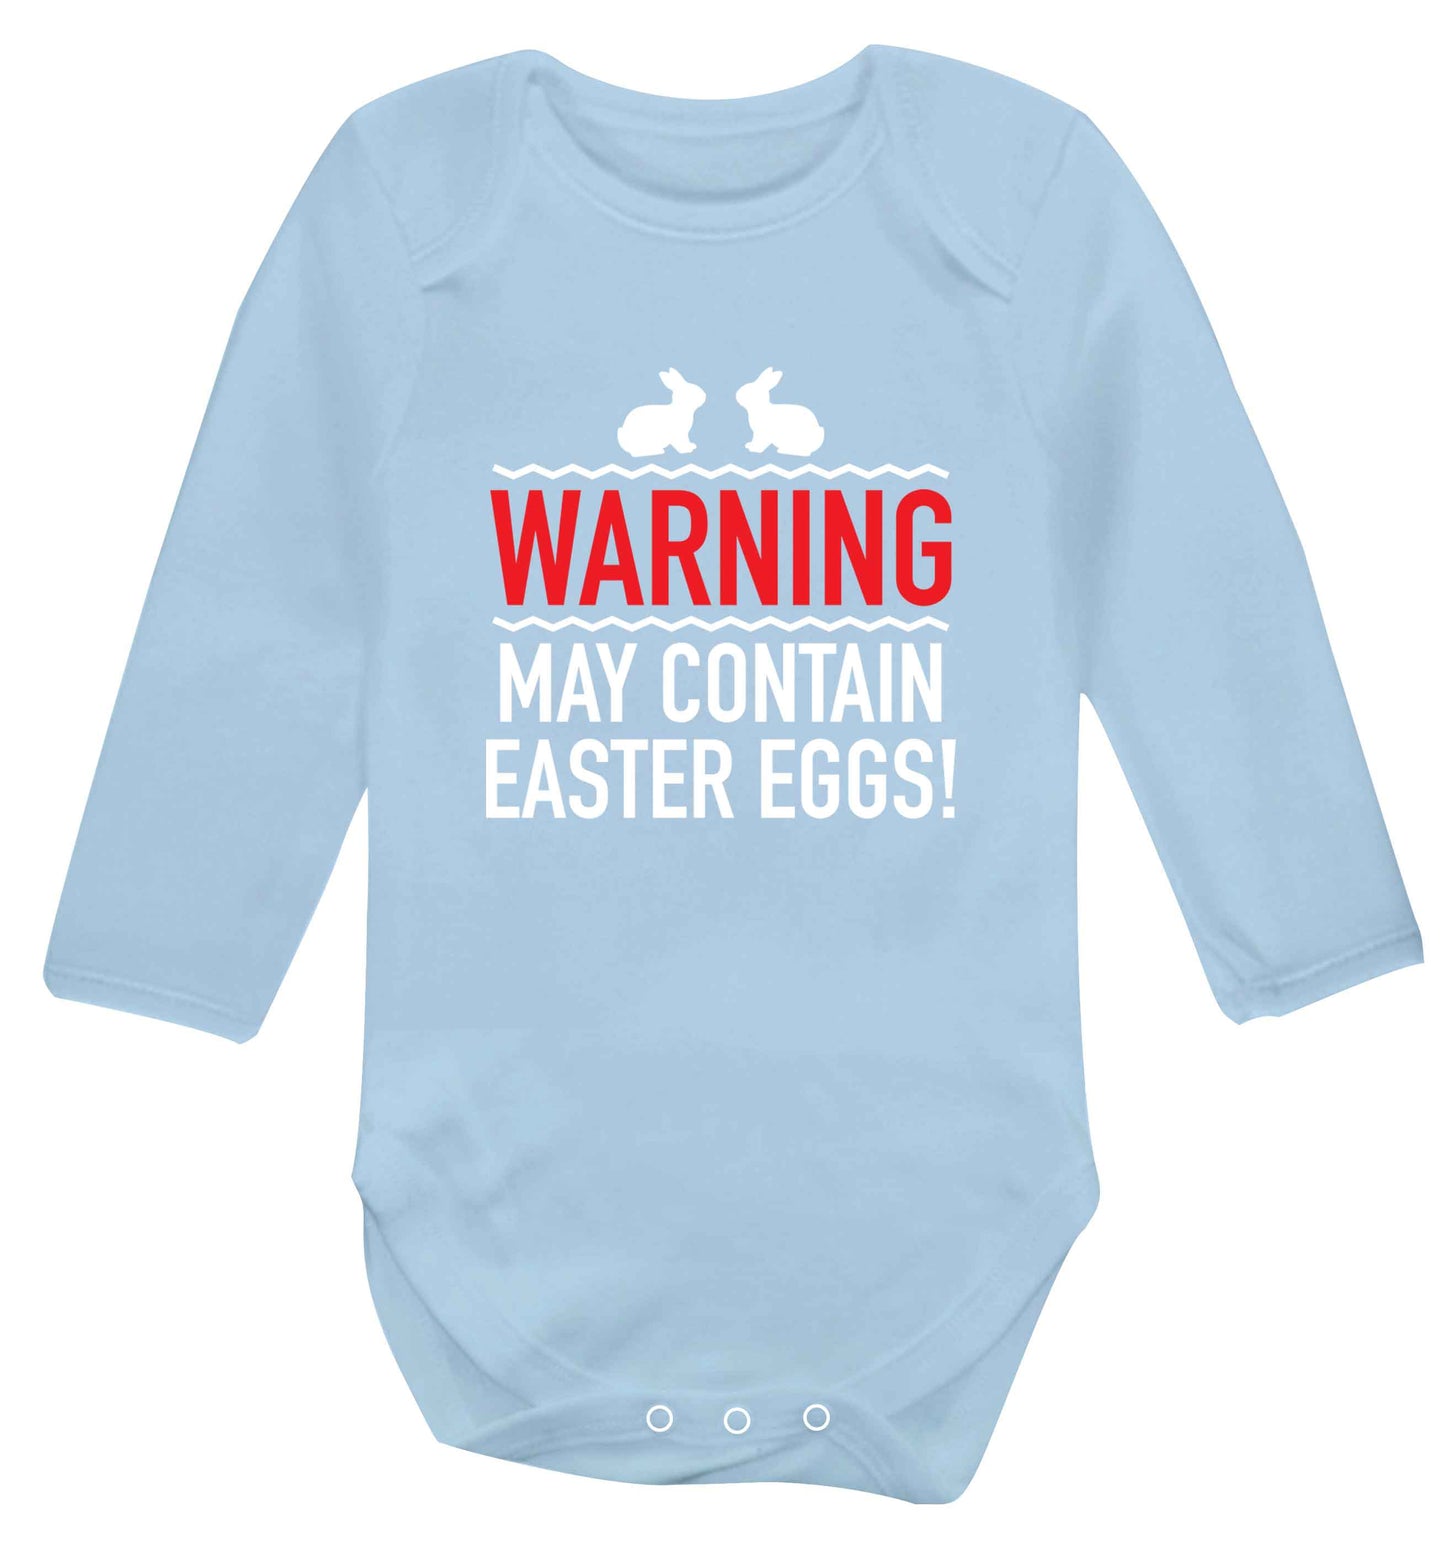 Warning may contain Easter eggs baby vest long sleeved pale blue 6-12 months